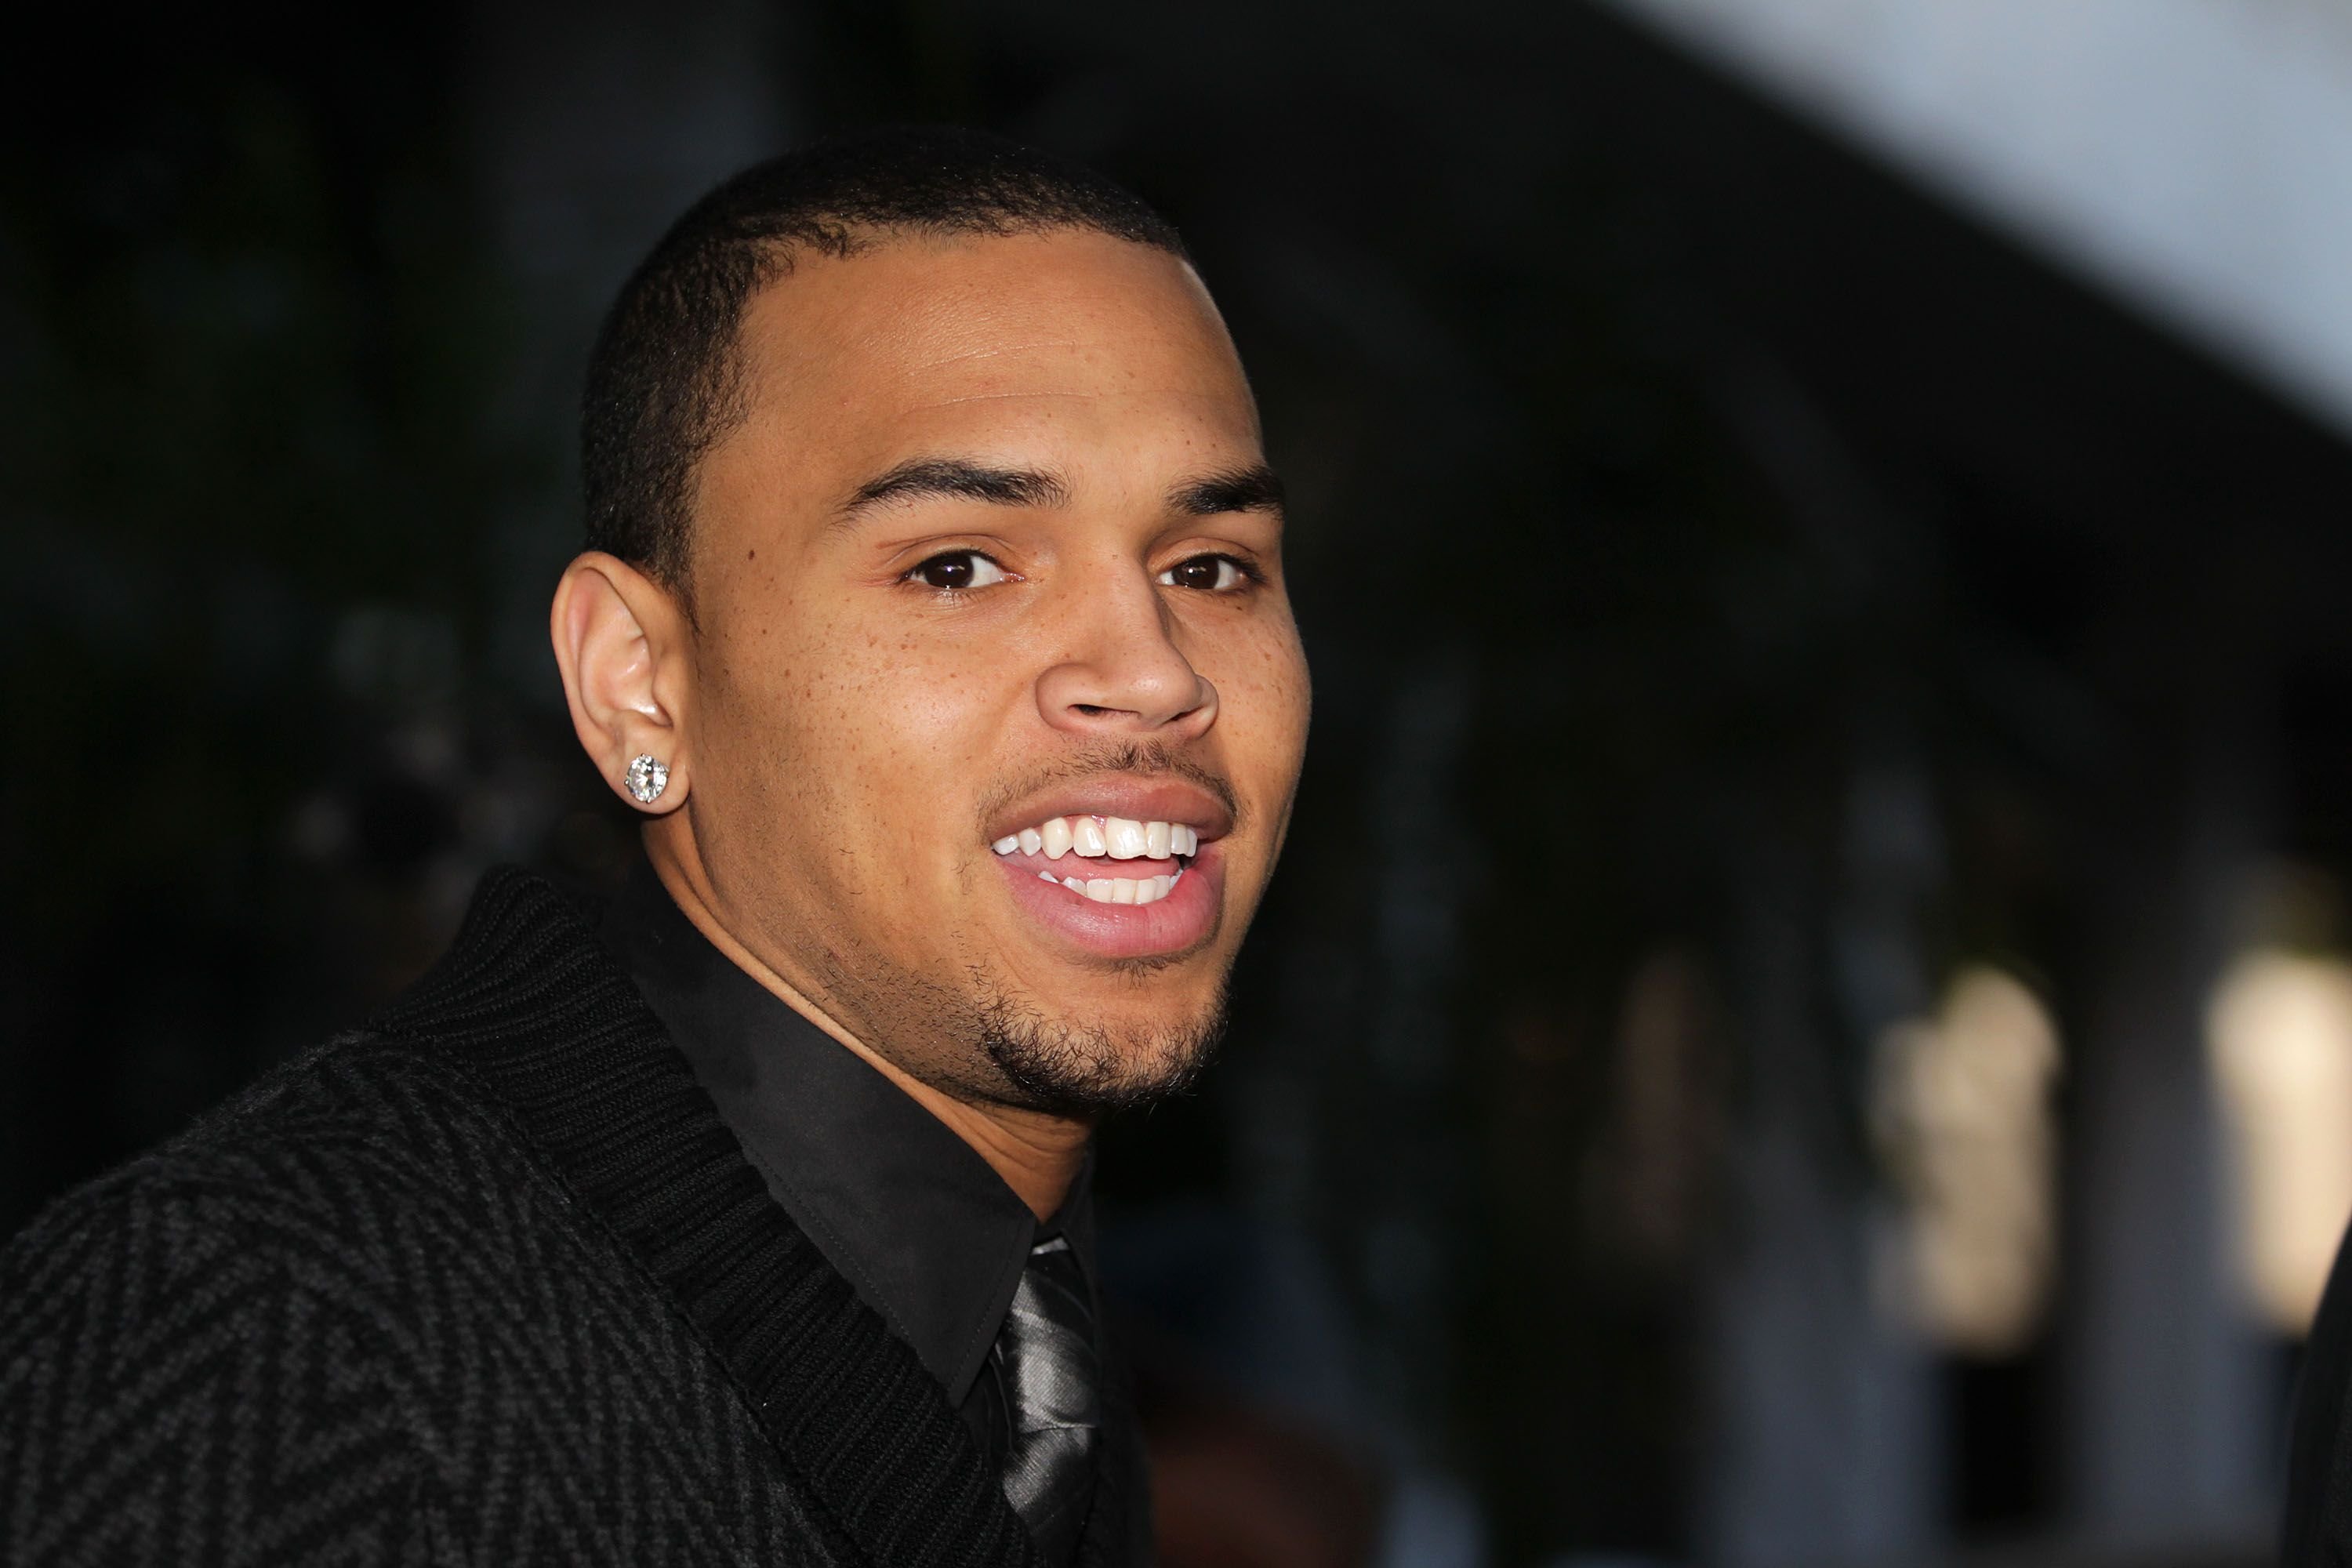 Chris Brown leaves the Los Angeles courthouse after a probation progress hearing on January 28, 2011. | Photo: Getty Images